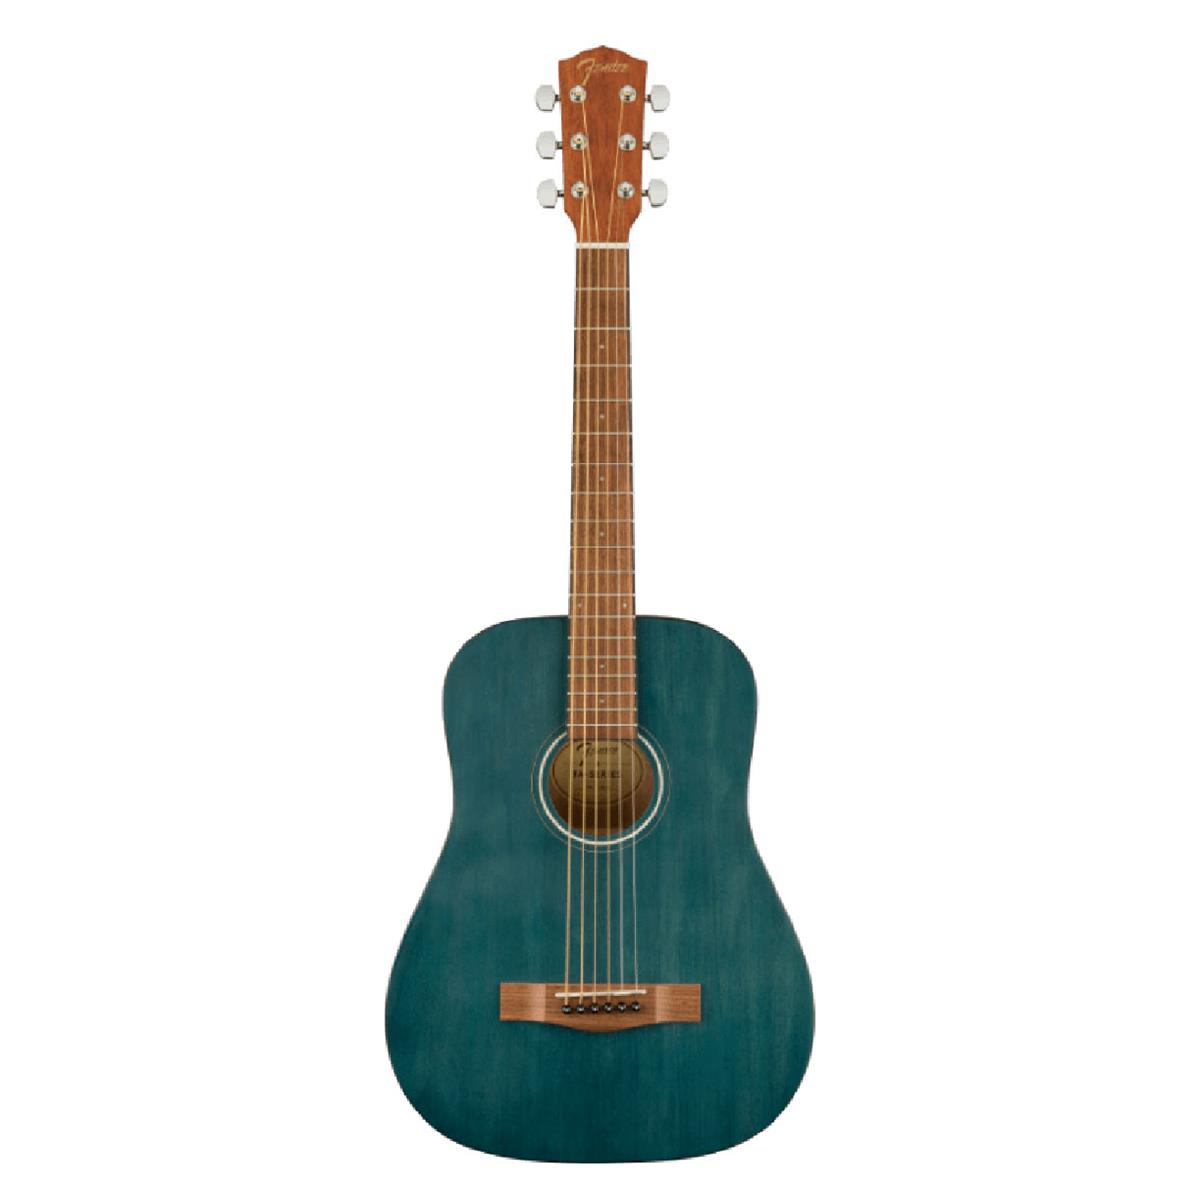 Fender FA-15 3/4 Scale Steel String Acoustic Guitar with Gig Bag, Blue -  0971170187